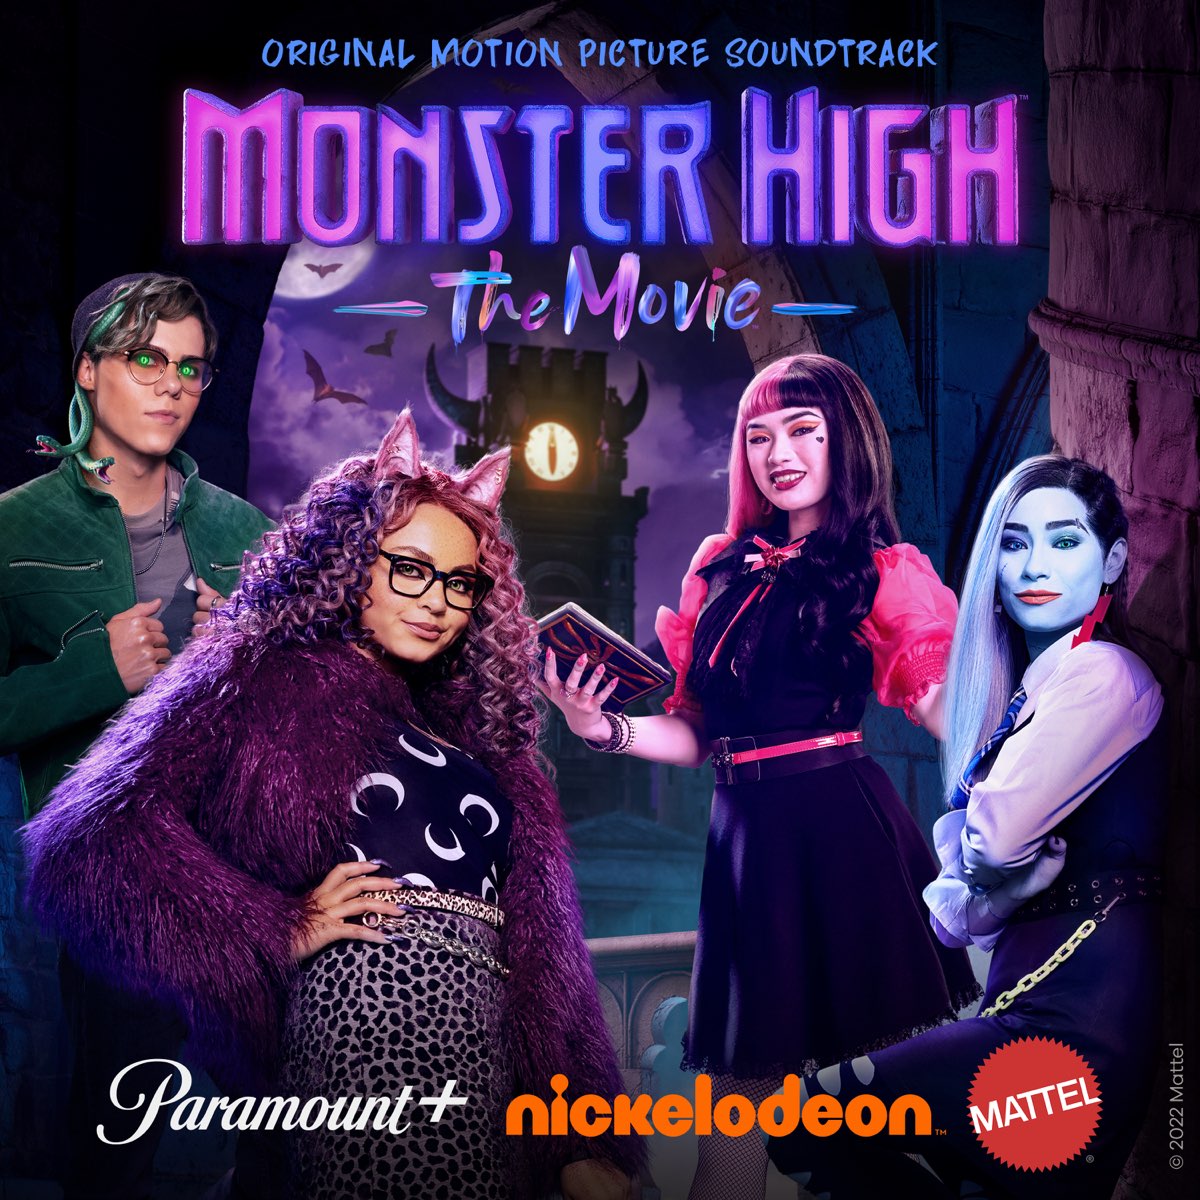 ‎Monster High the Movie (Original Film Soundtrack) by Monster High on ...